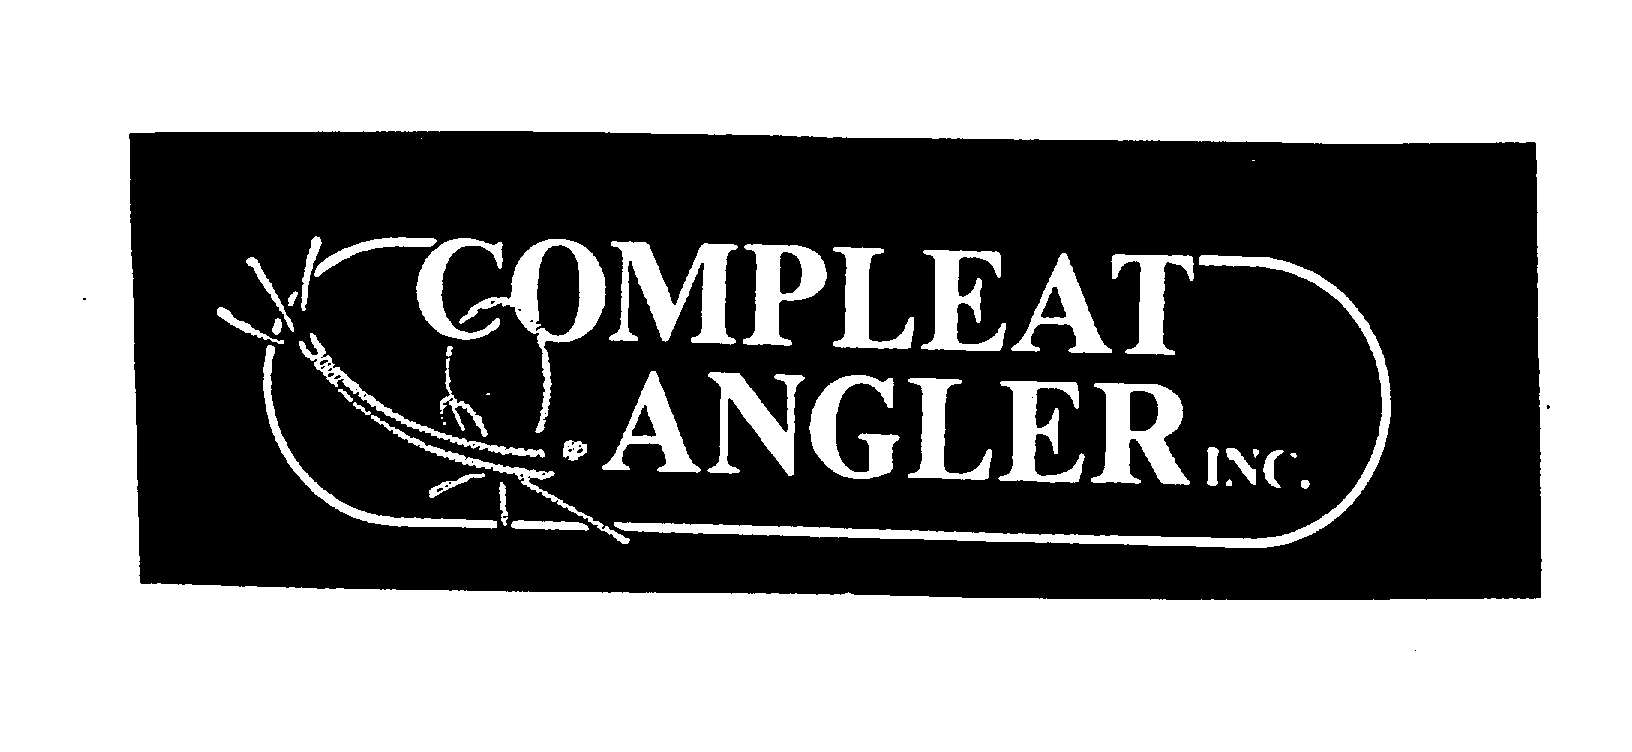  COMPLEAT ANGLER INC.